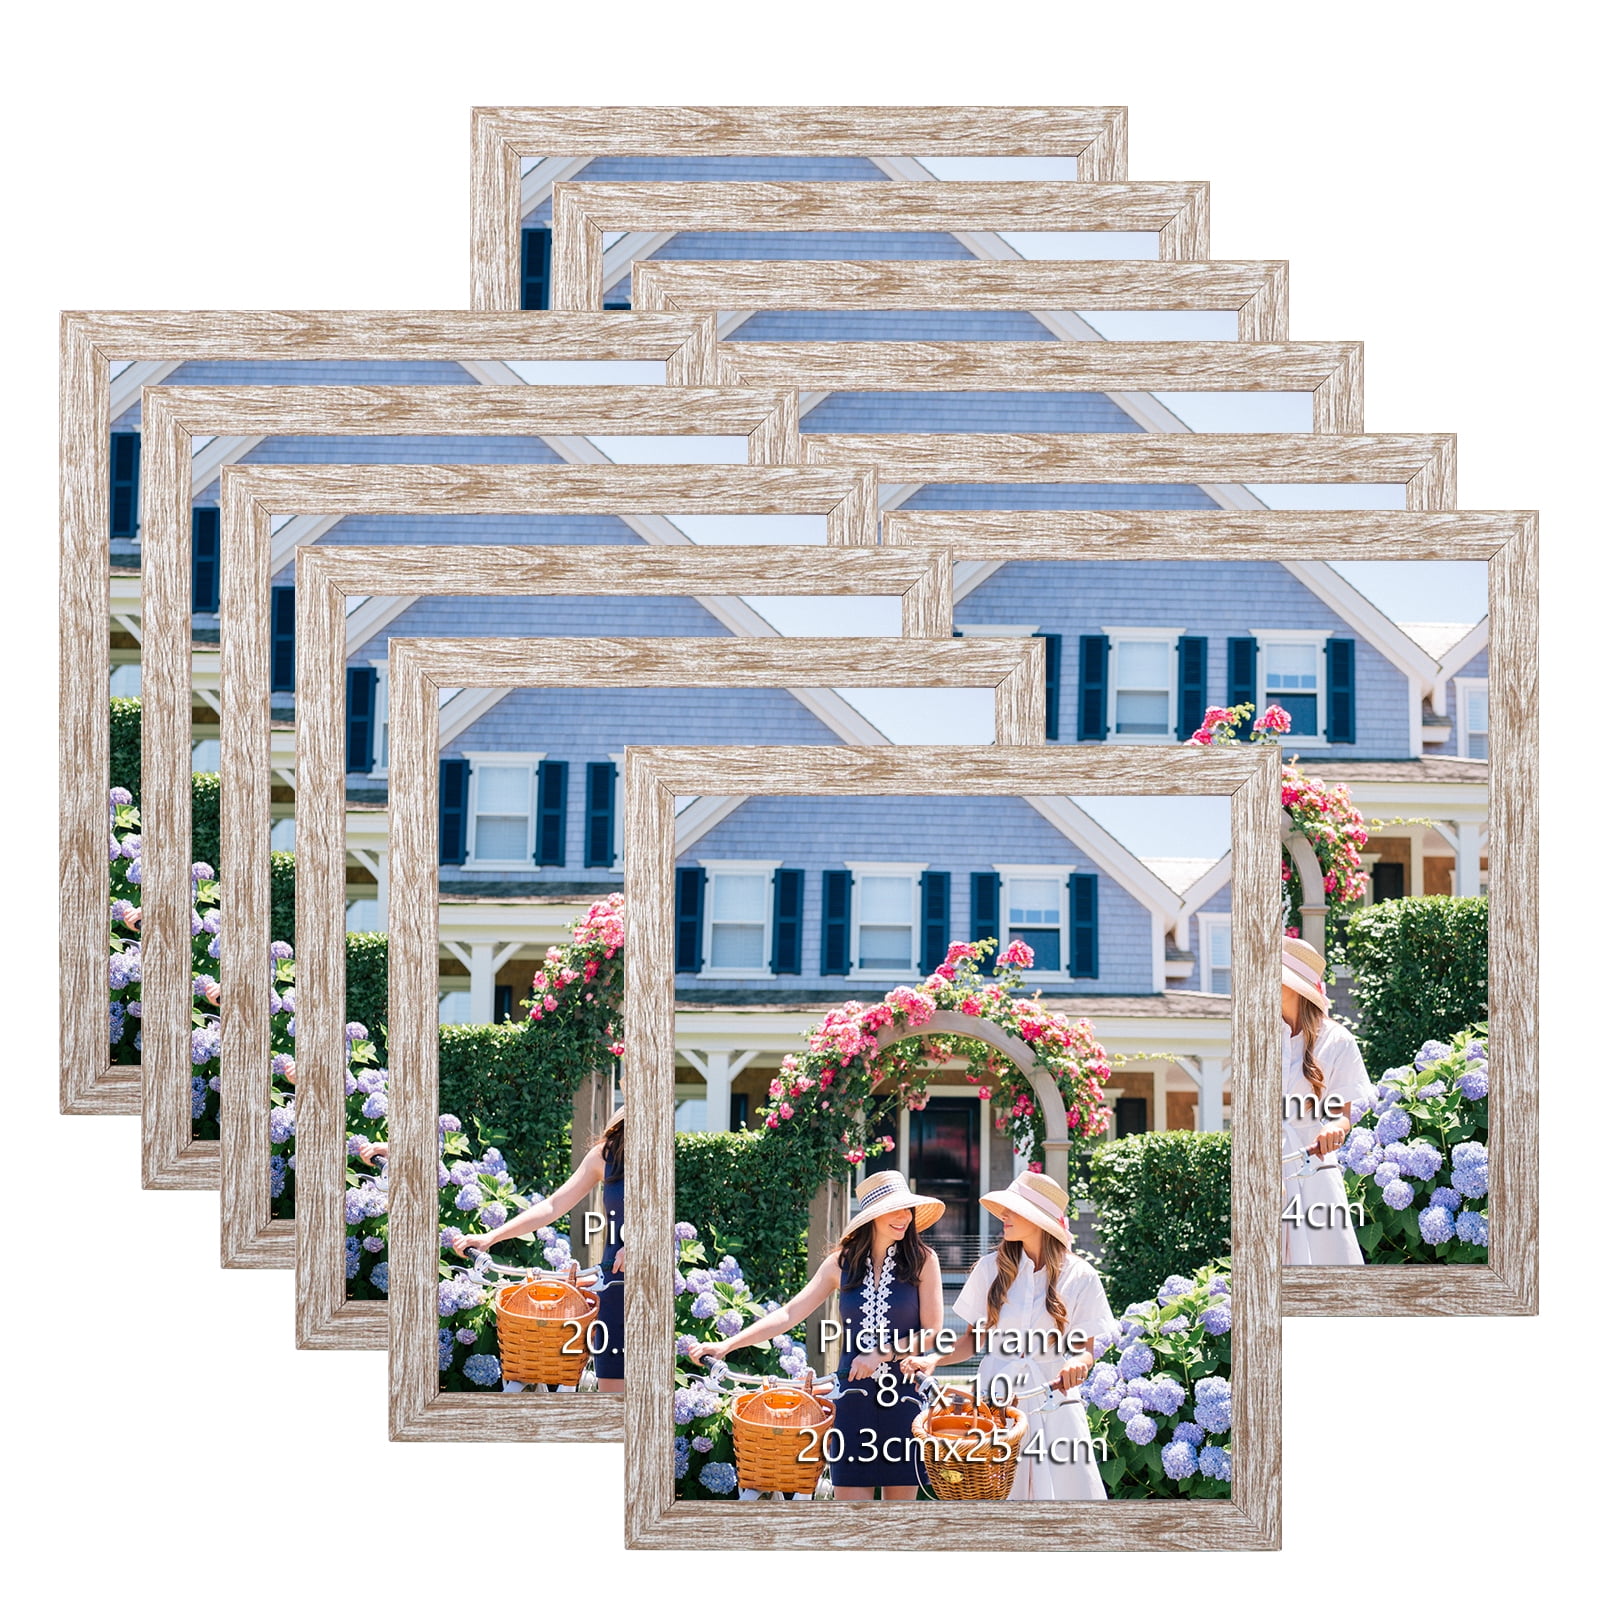 16x20 in, Set of 4, Beige Oak Frame – Haus and Hues